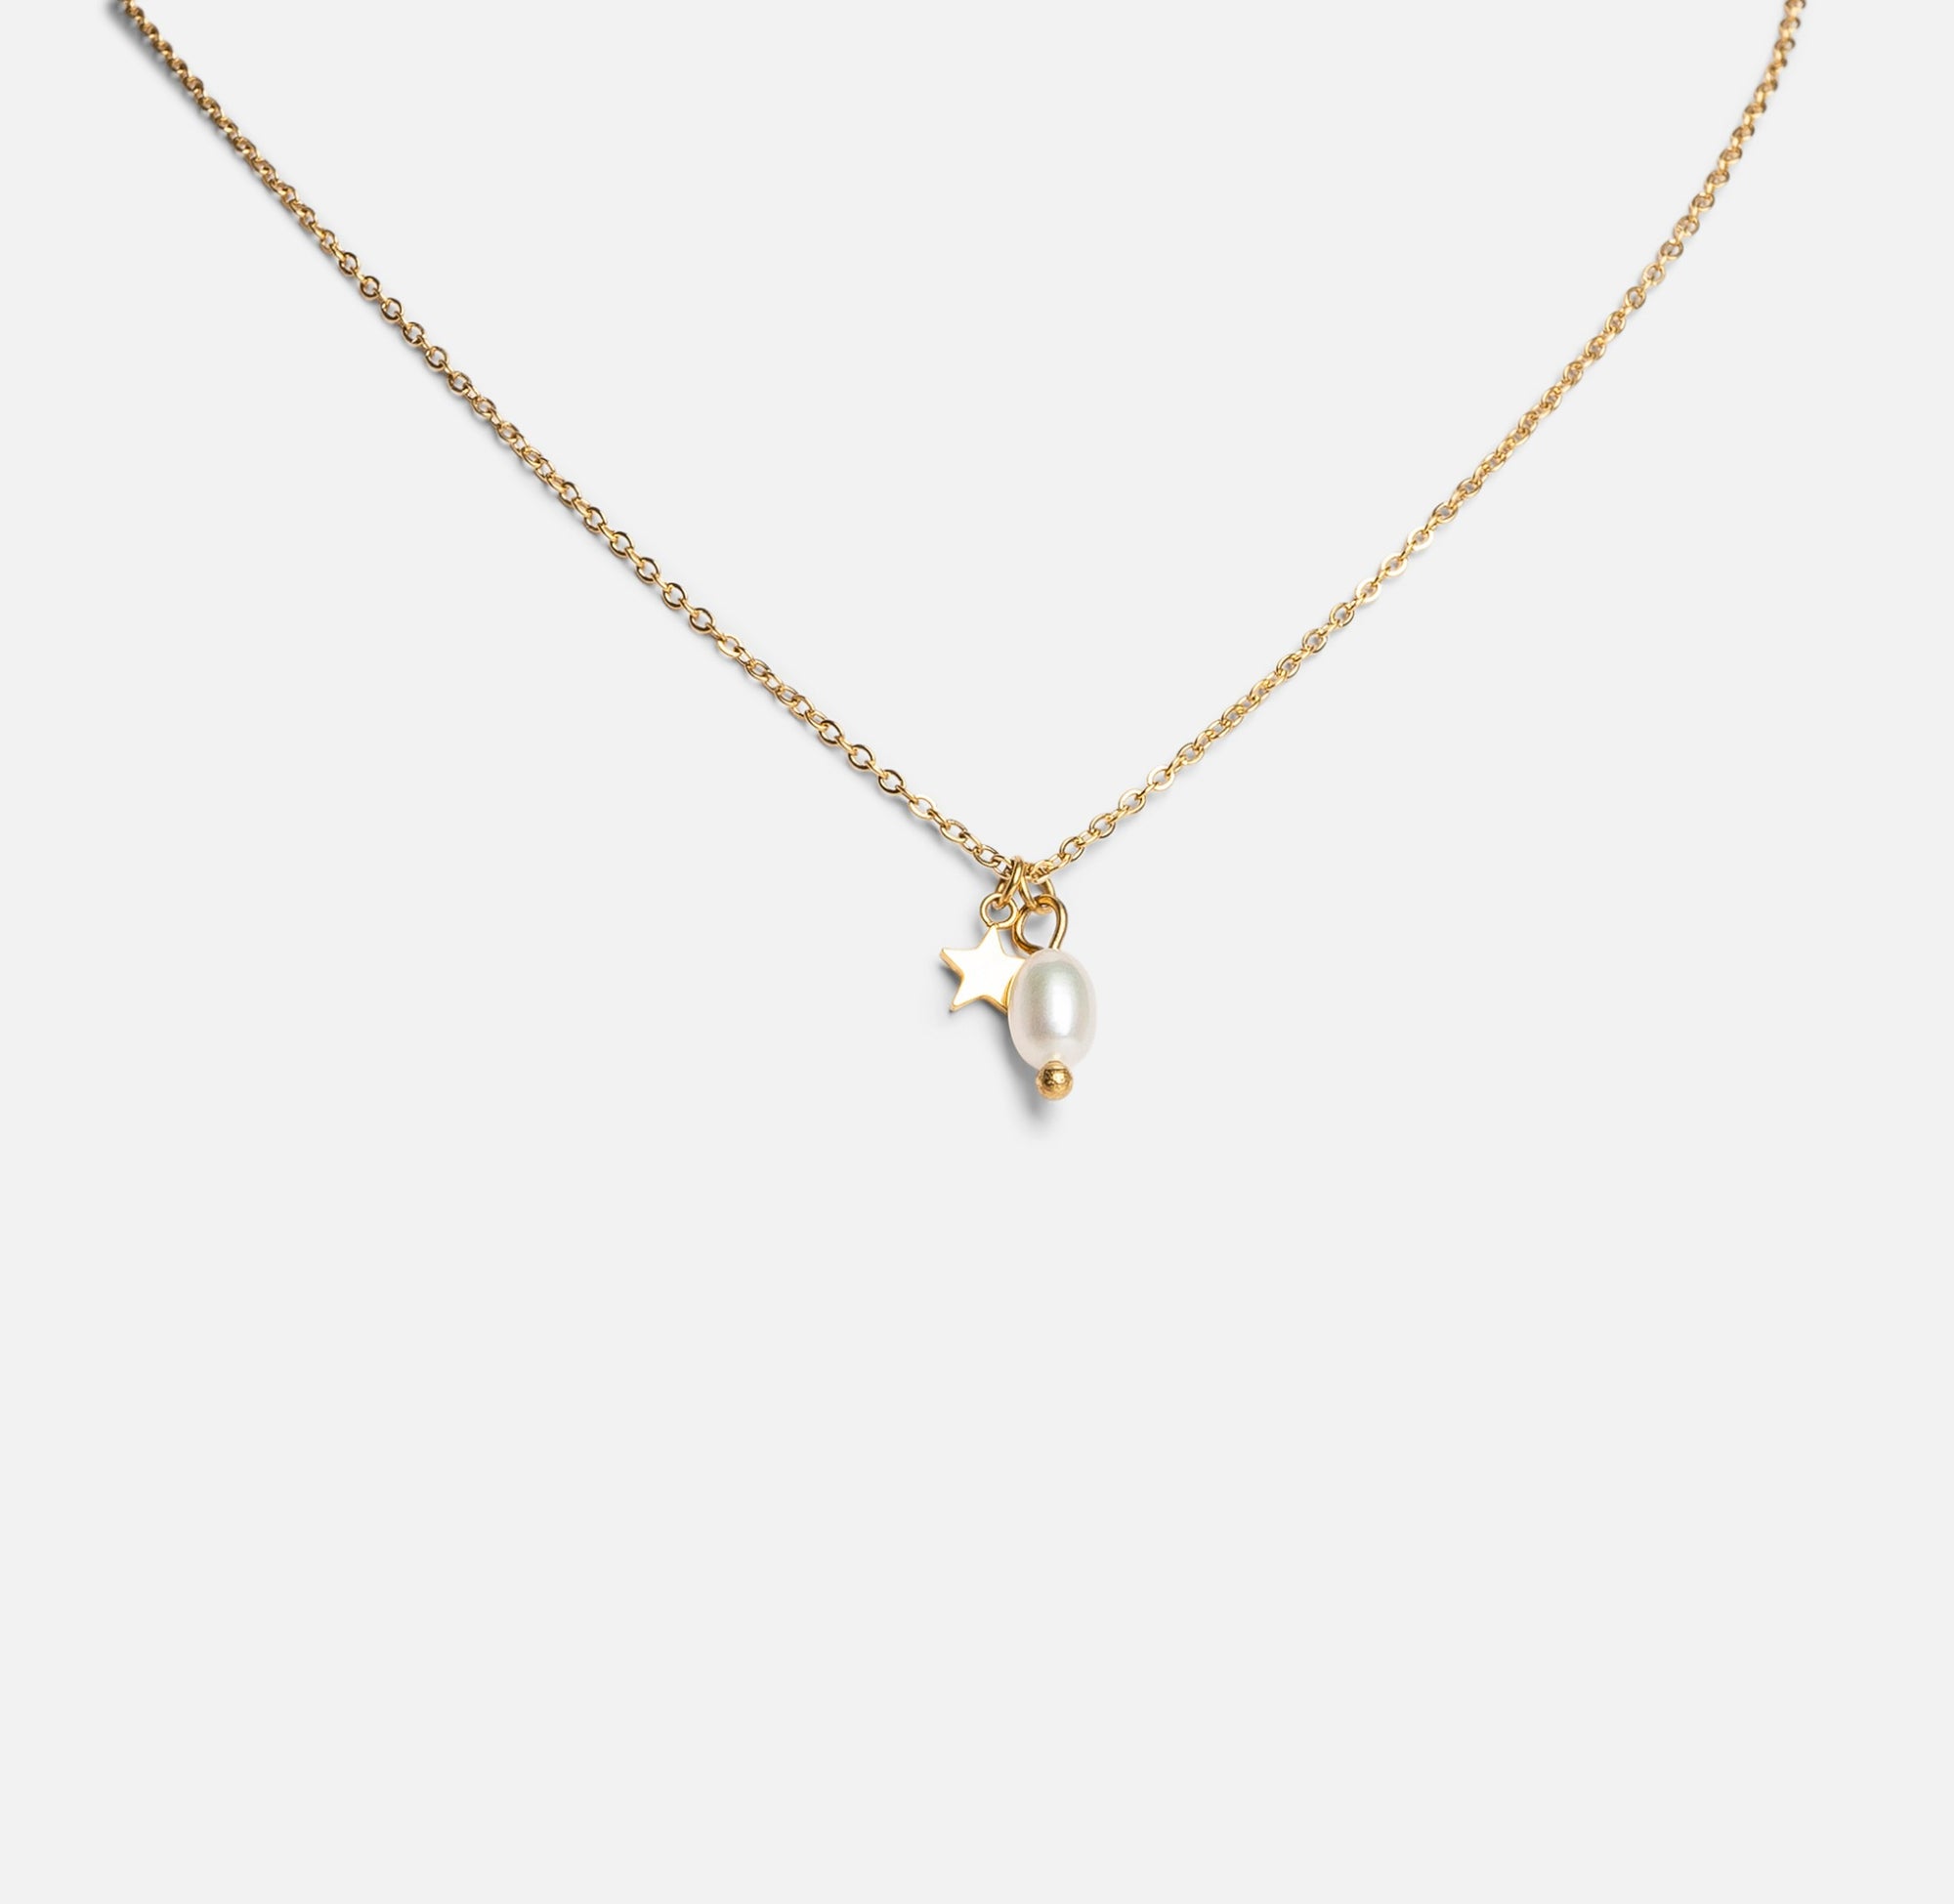 Mini golden necklace with star and pearl charms in stainless steel